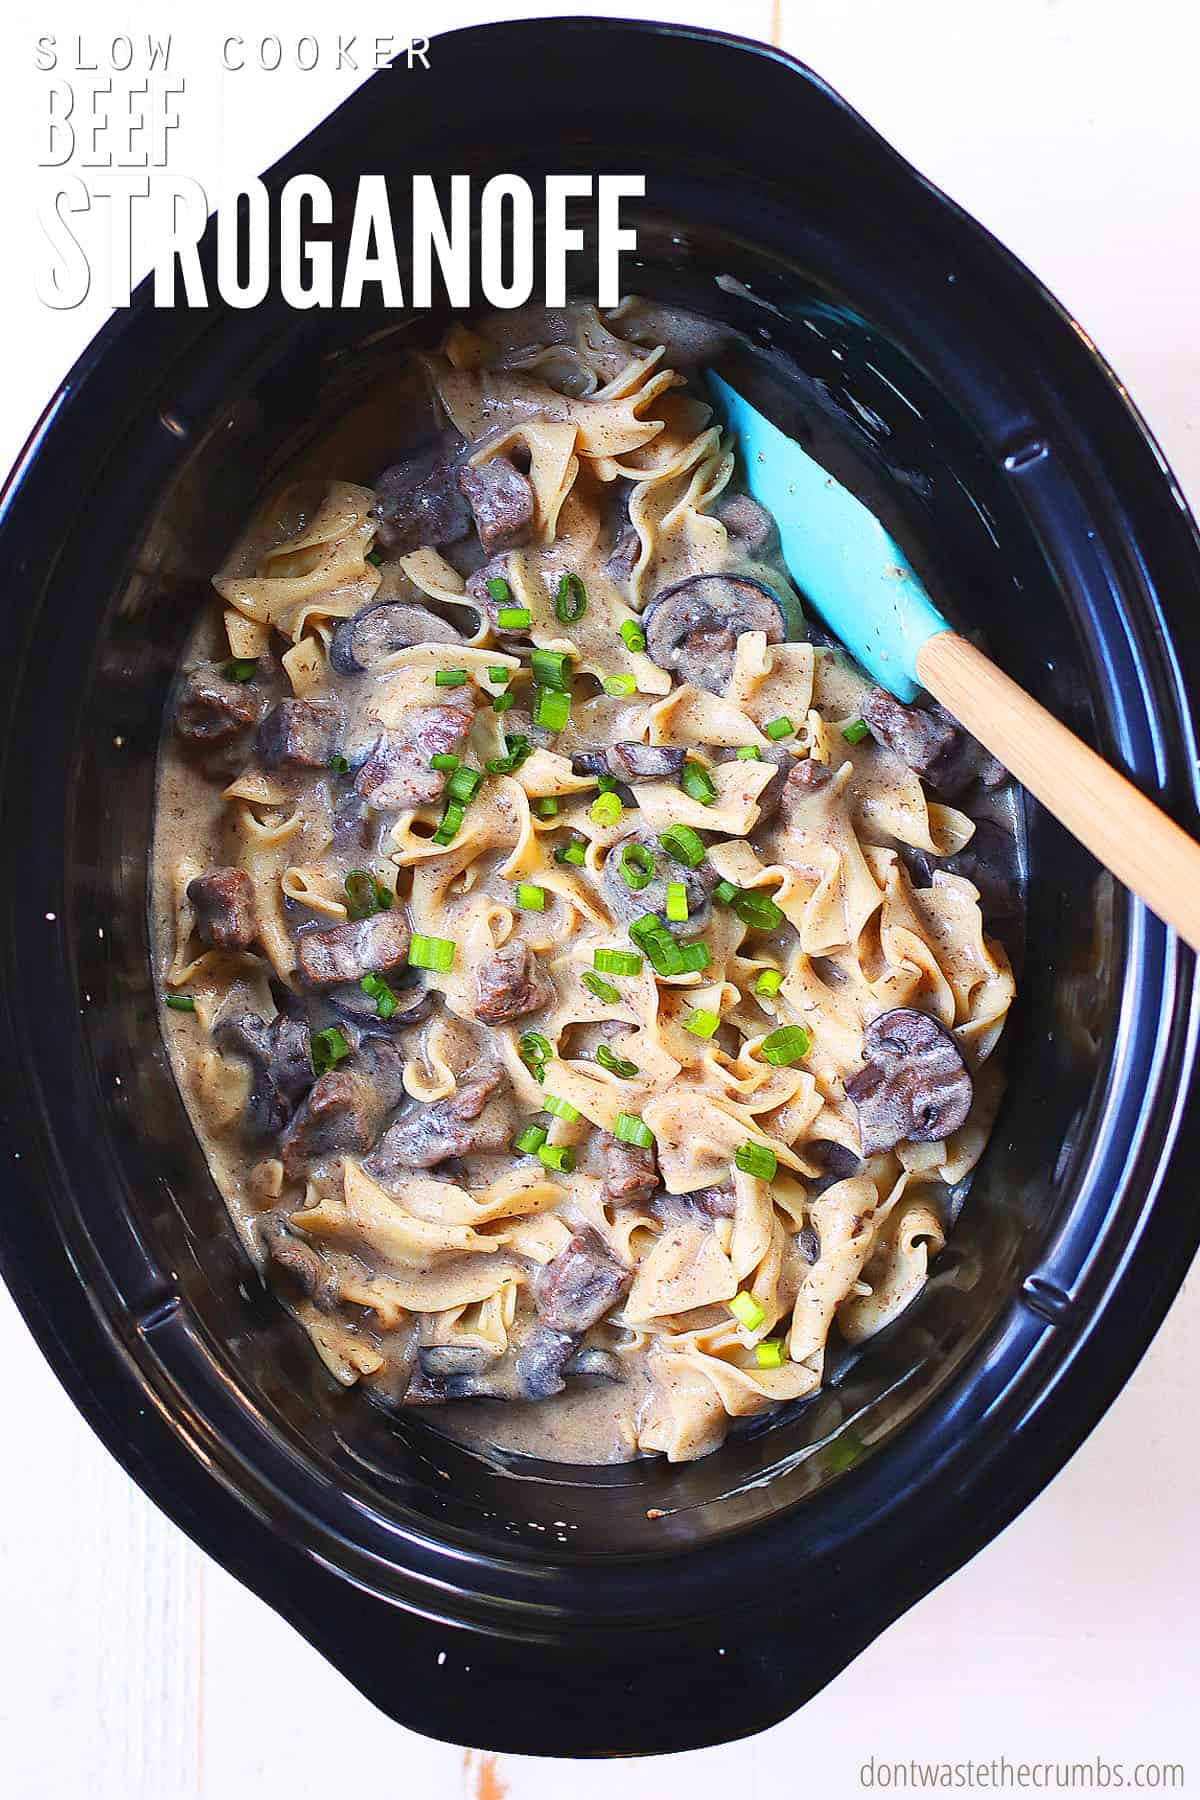 This healthy and delicious slow cooker beef stroganoff is SUPER easy to make. Dump all of your ingredients into the slow cooker and within a few hours, you have the perfect meal. PERFECT for those busy weeknights!